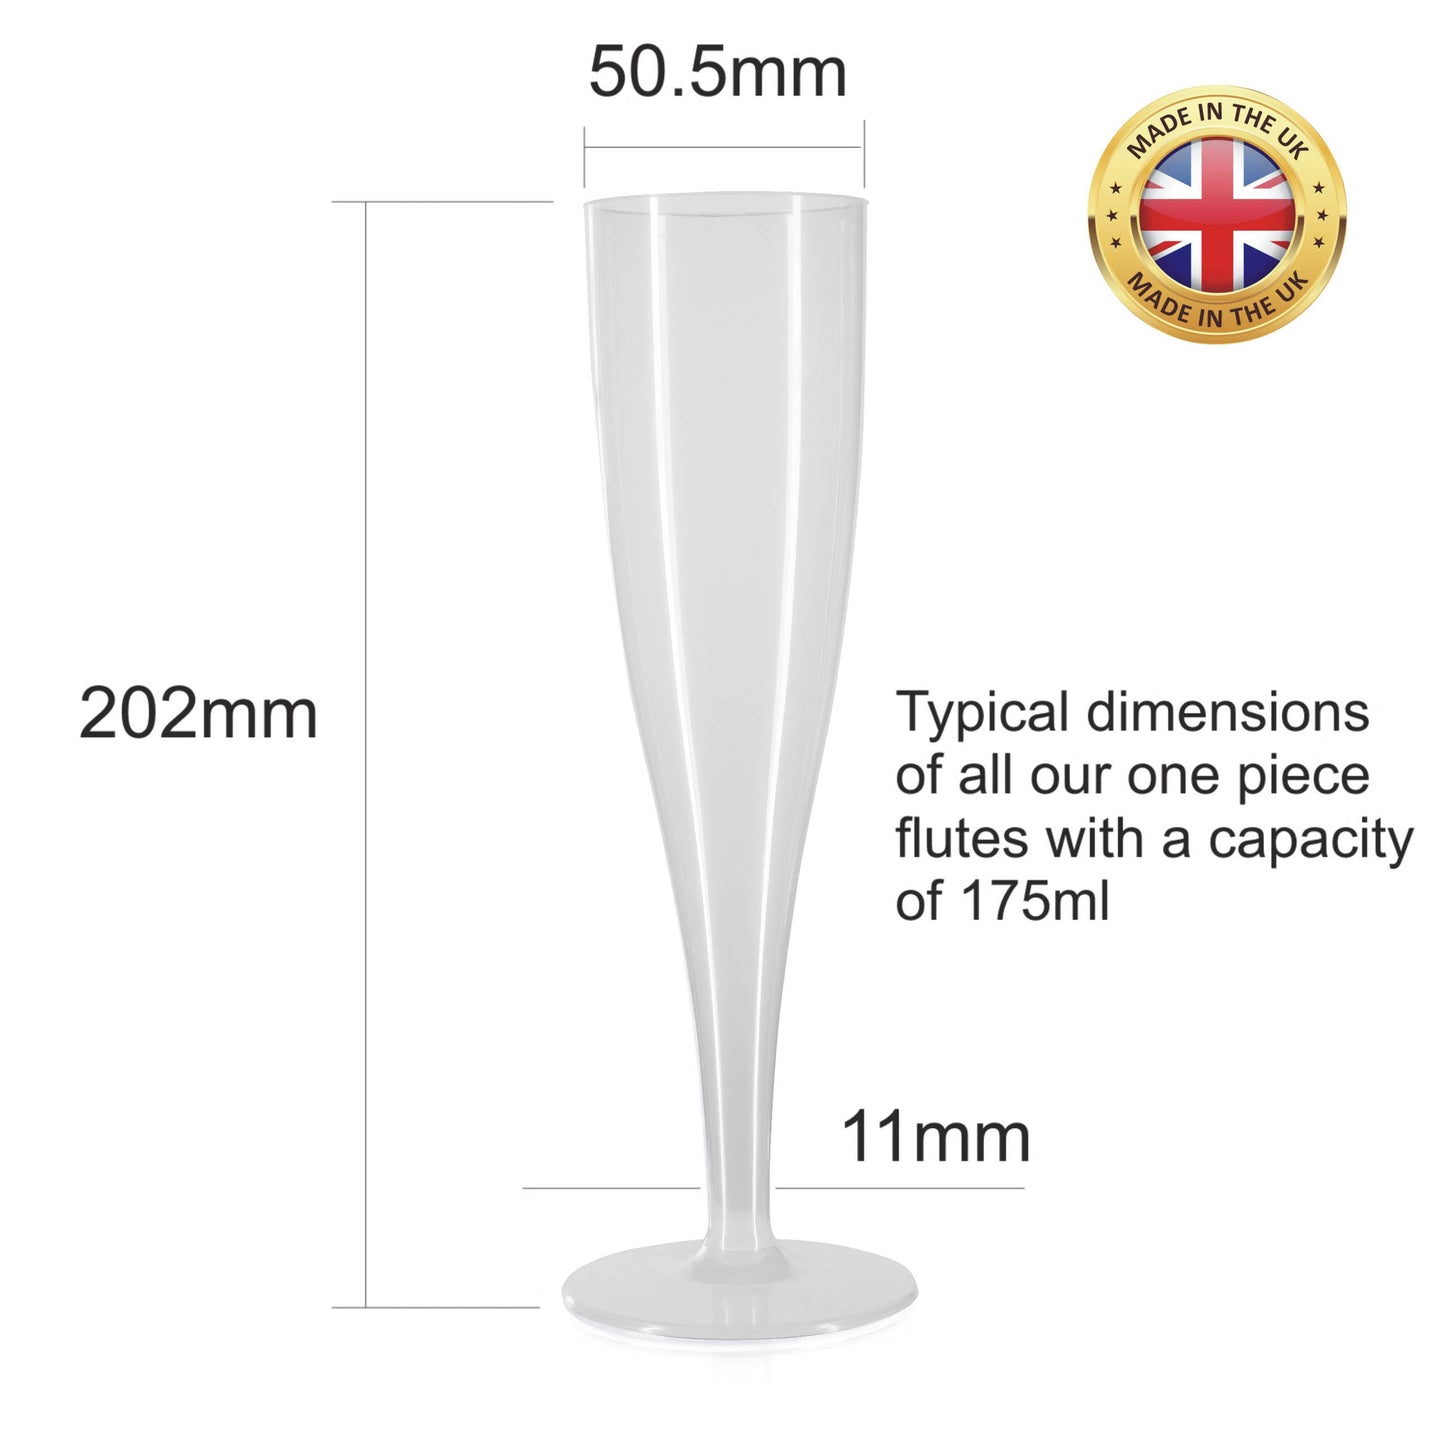 100 x White Prosecco Flutes – Biodegradable Material - Disposable – Glossy Bright White Prosecco Glass - One Piece – Pack of 100-5056020188933-EY-PP-262-Product Pro-Champagne Flute, Champagne Glasses, Flutes, Prosecco Flute, Prosecco Glasses, White Flutes